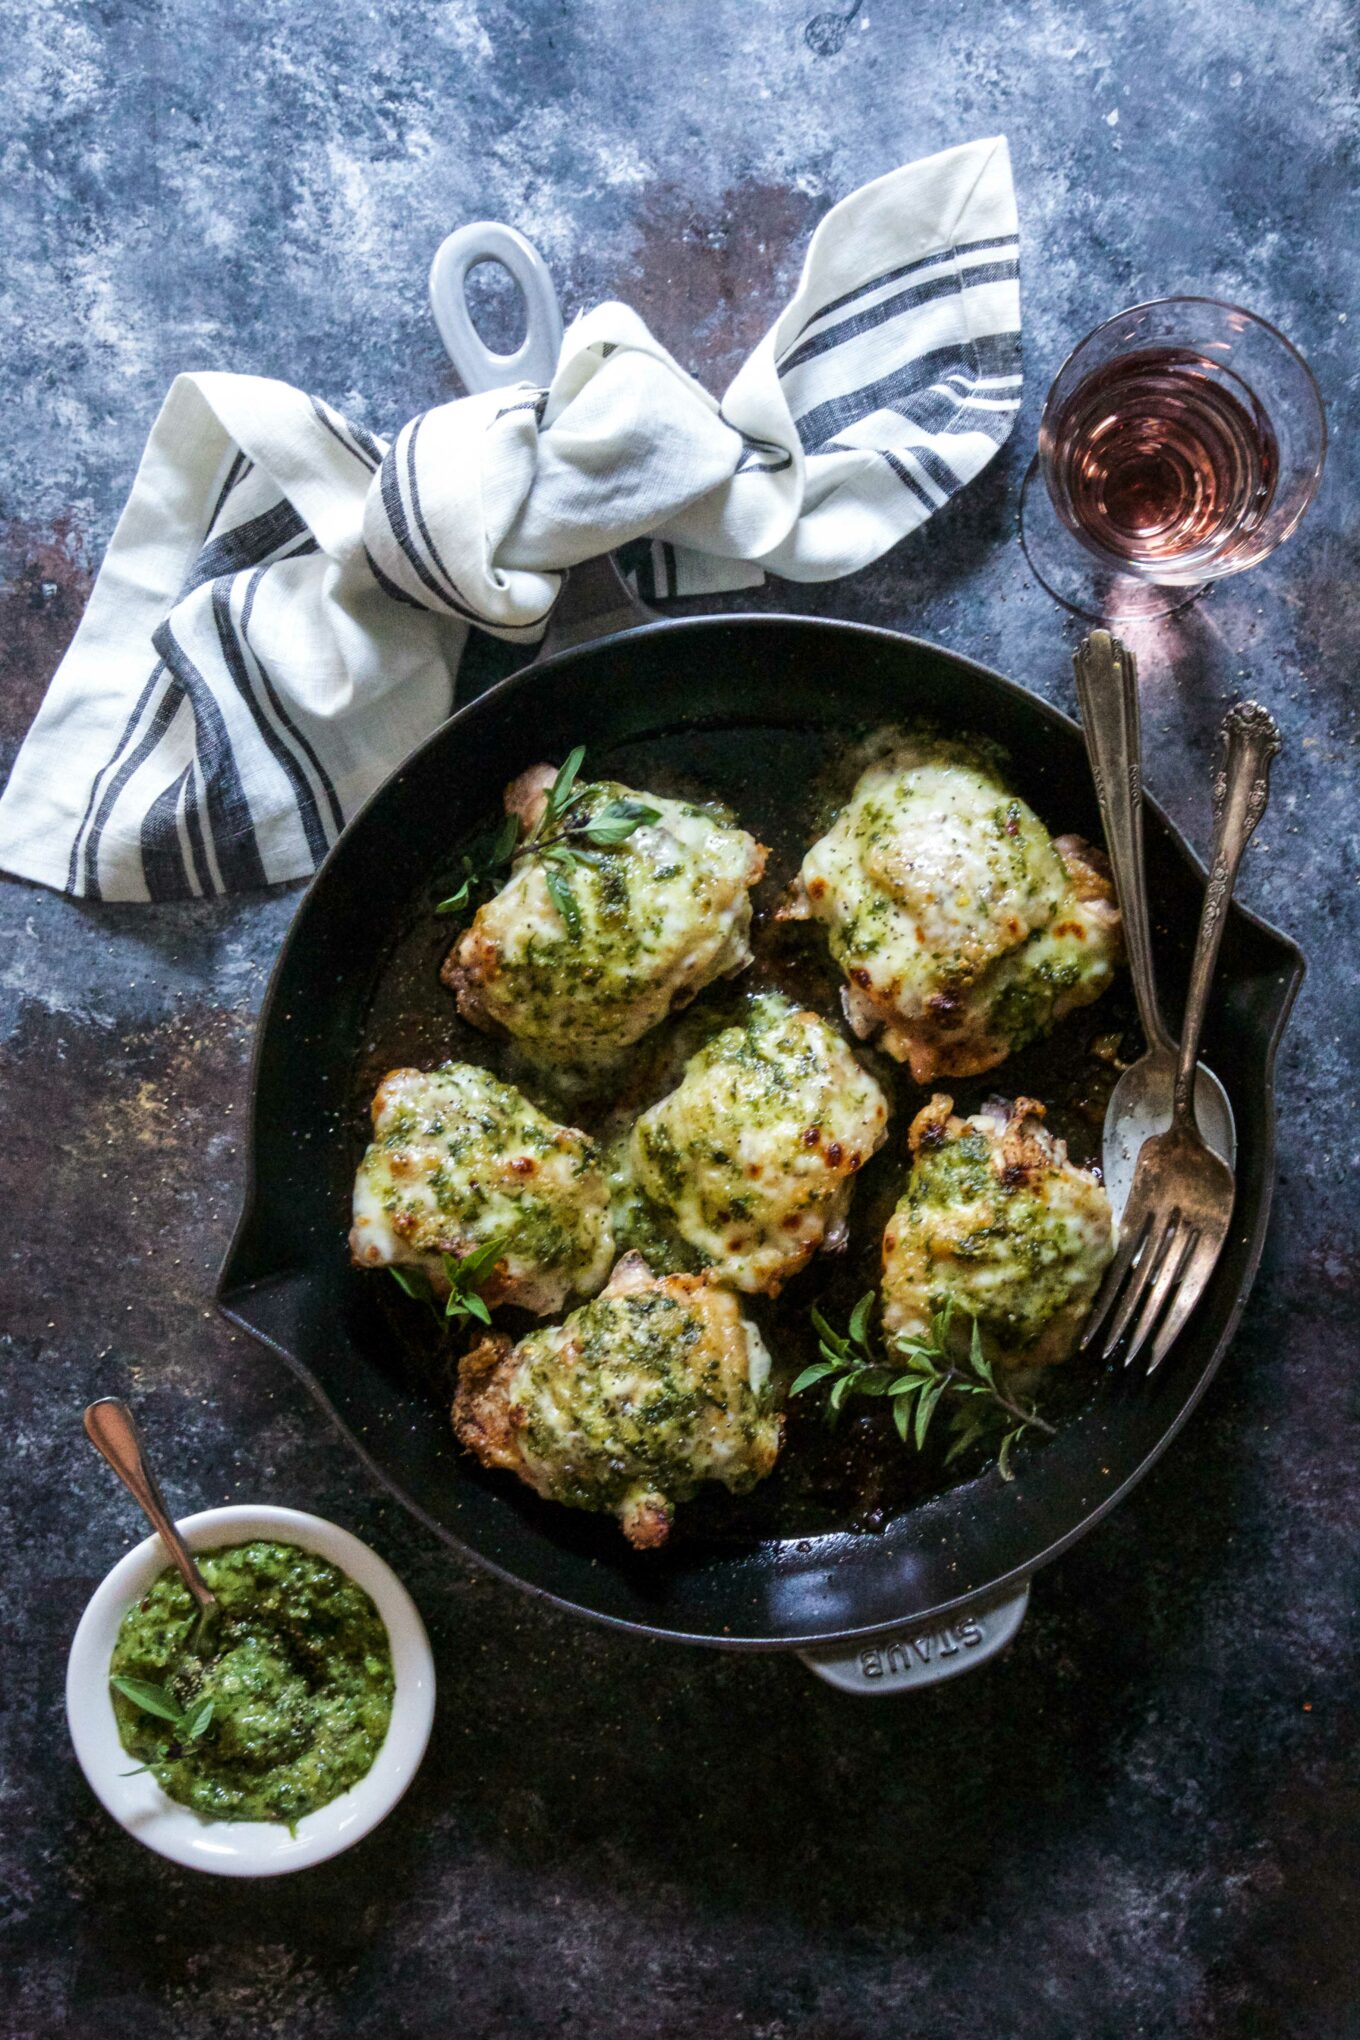 Crispy Skillet Chicken with Miso-Sesame Pesto - The Curious Plate